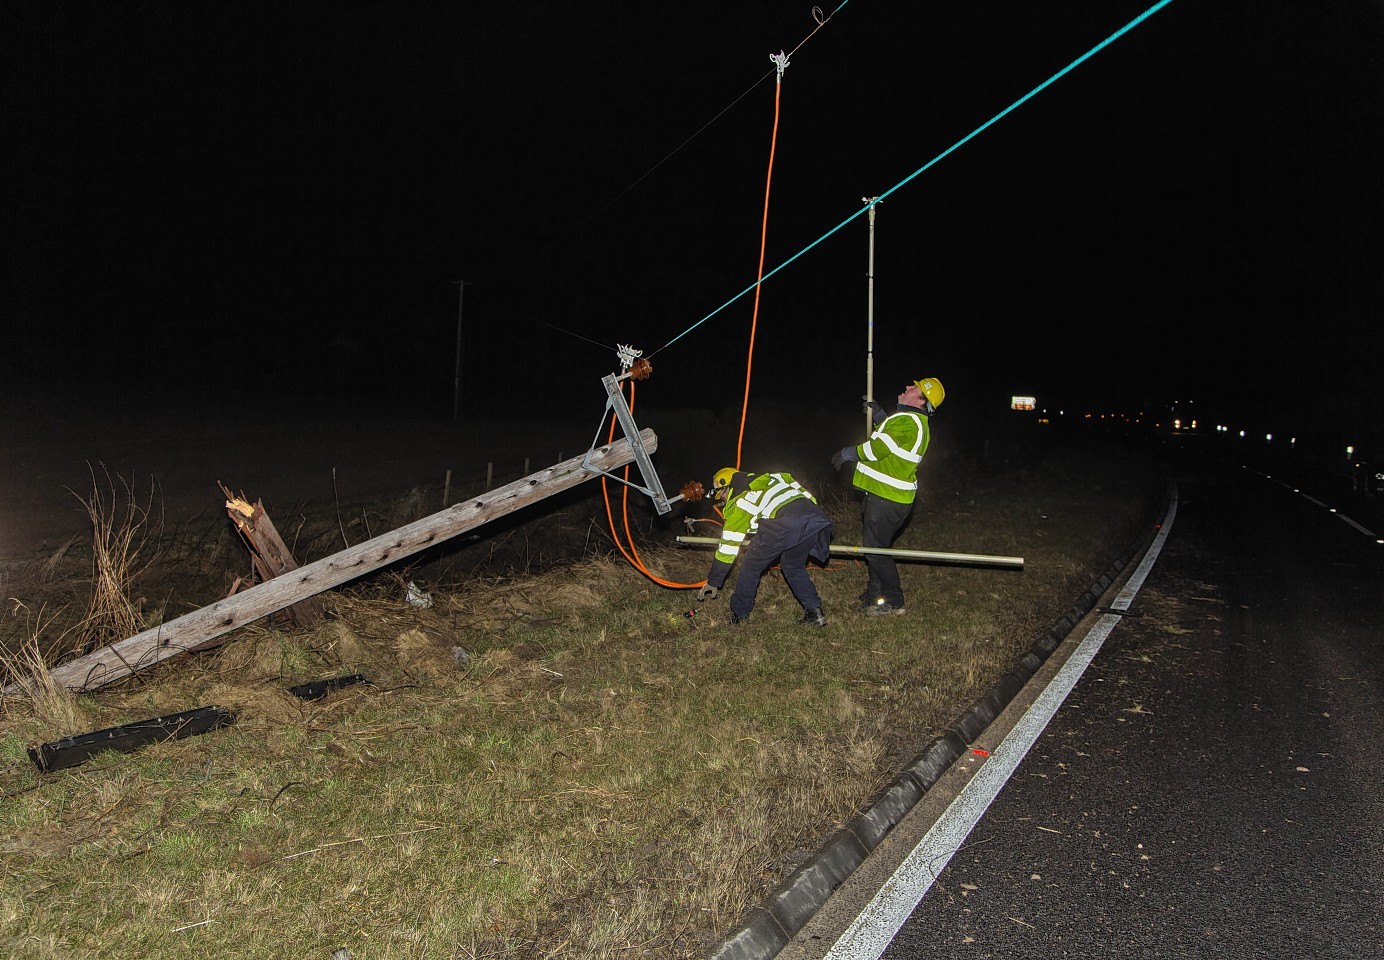 SSE engineers at the scene of the crash trying to restore power